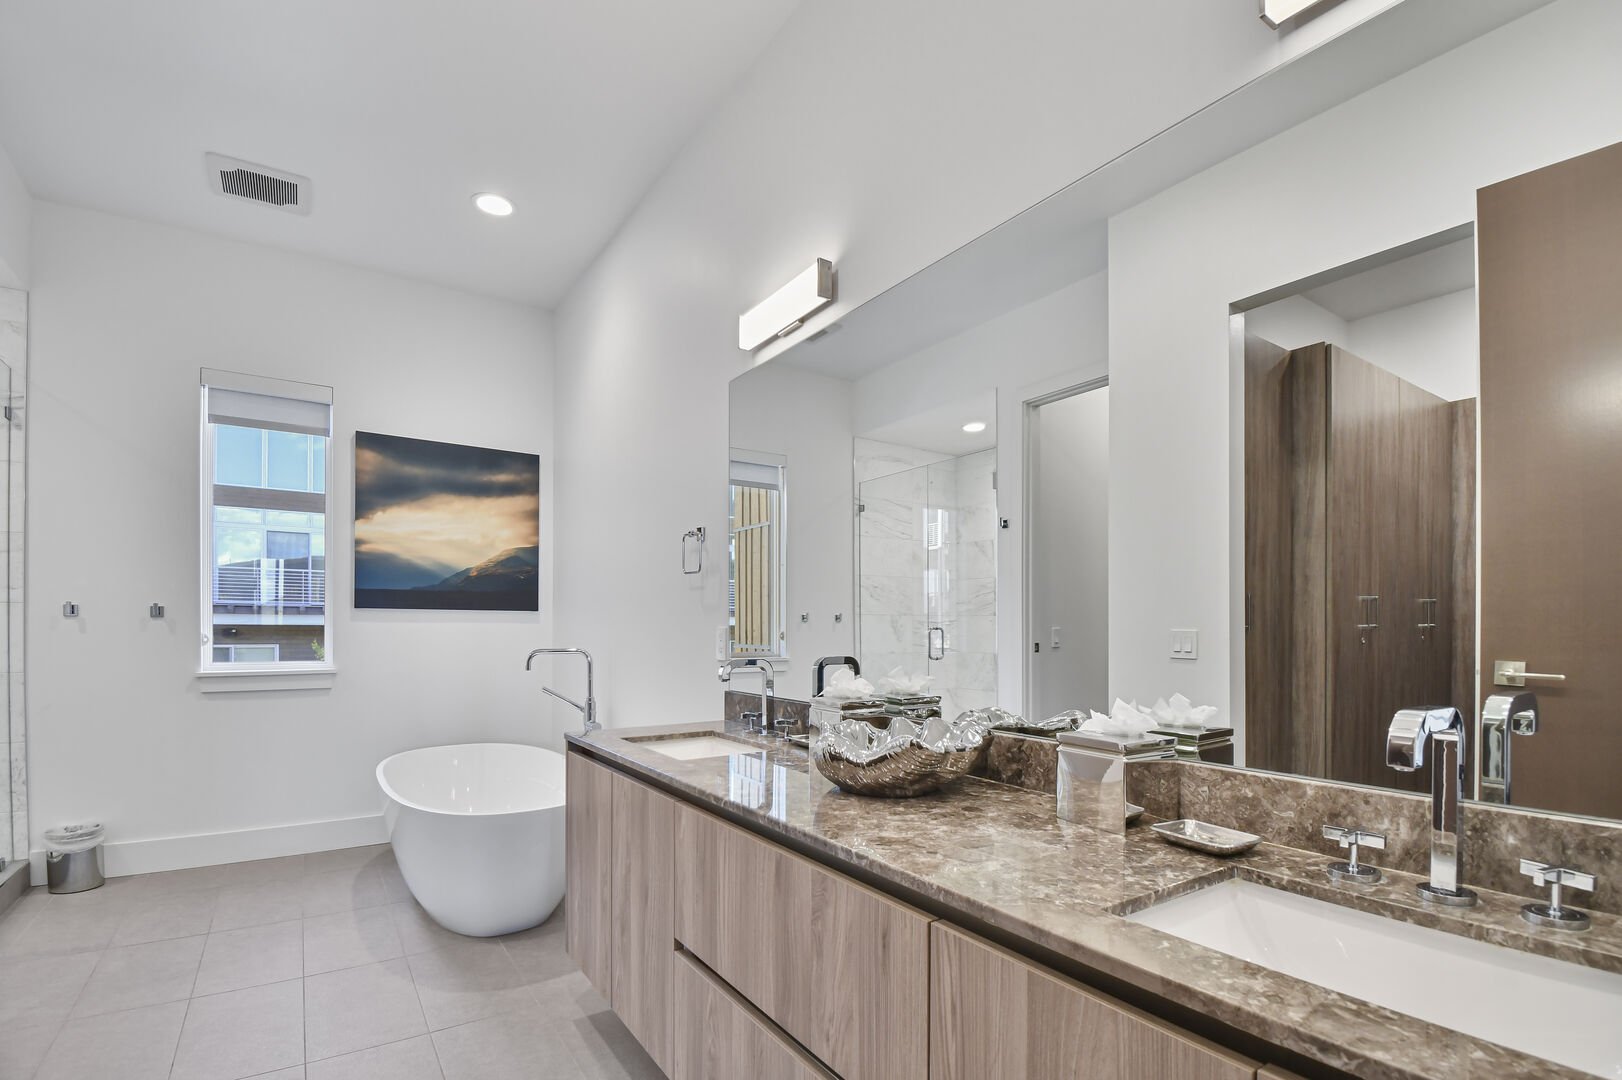 master bath is ensuite with double vanity and deed soaking tub